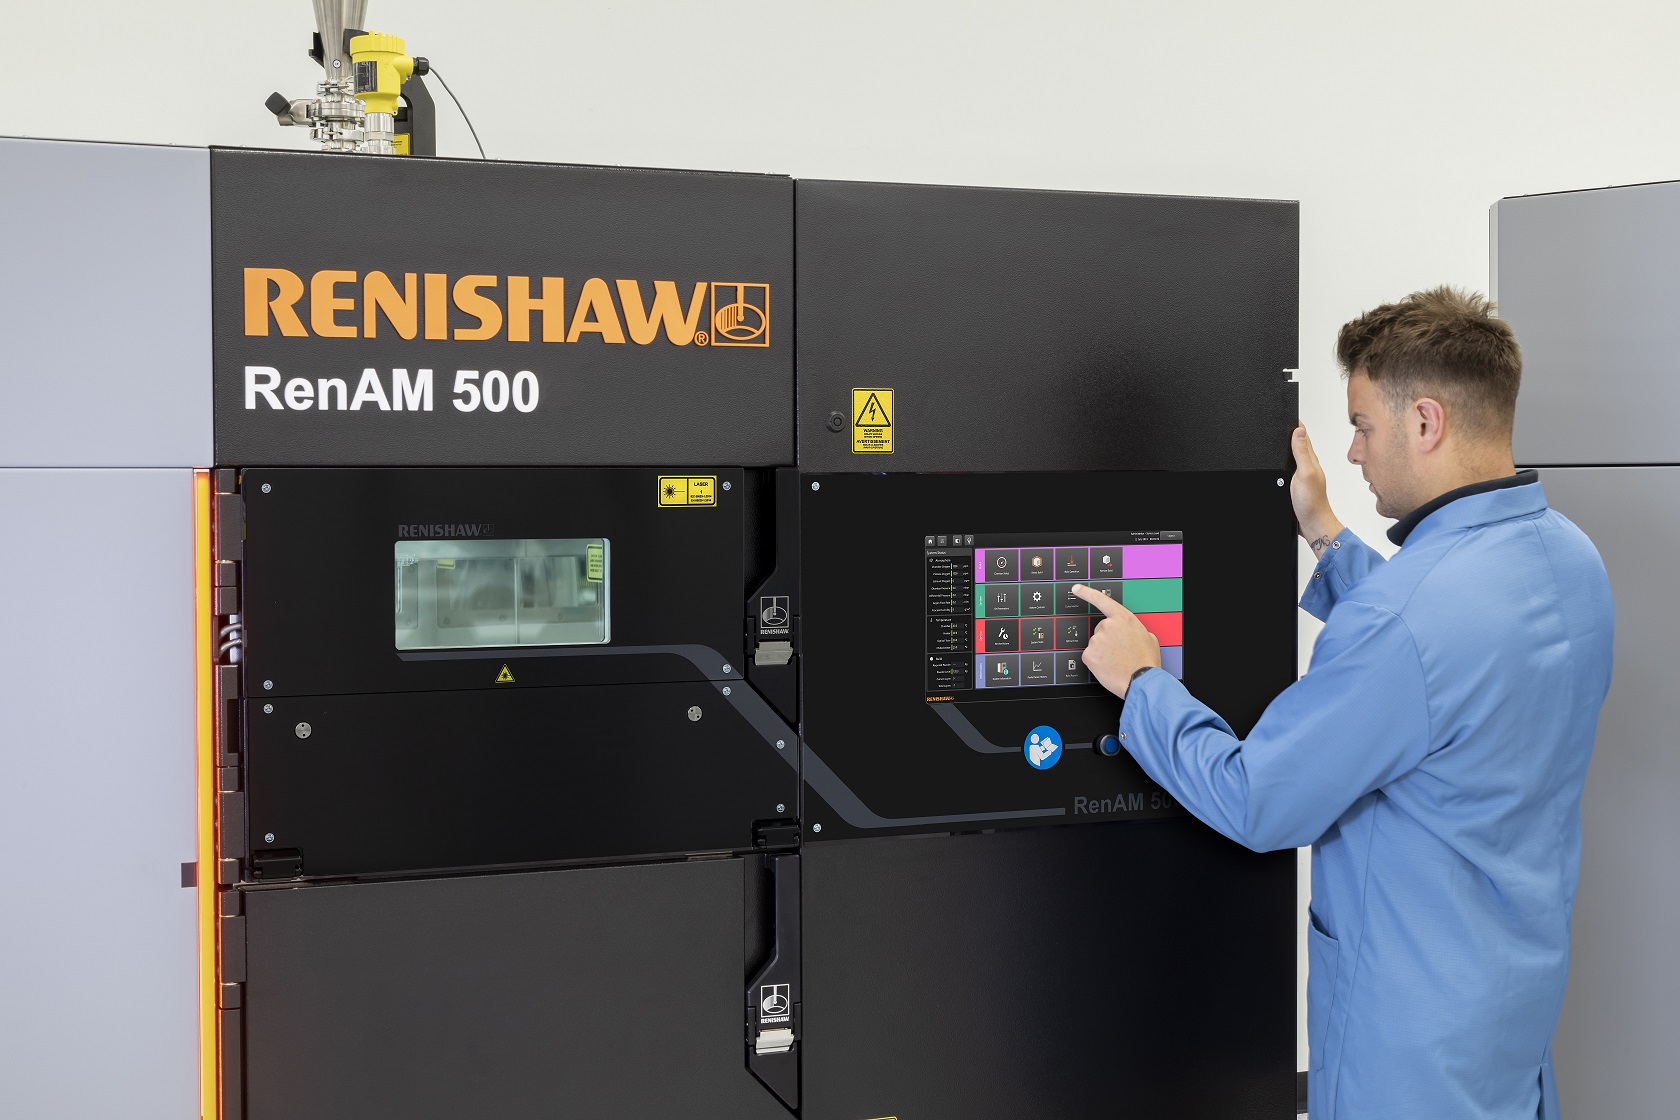 Renishaw is part of an AM group that has been recognized in the Collaborate to Innovate (C2I) awards in the aerospace and defence category.